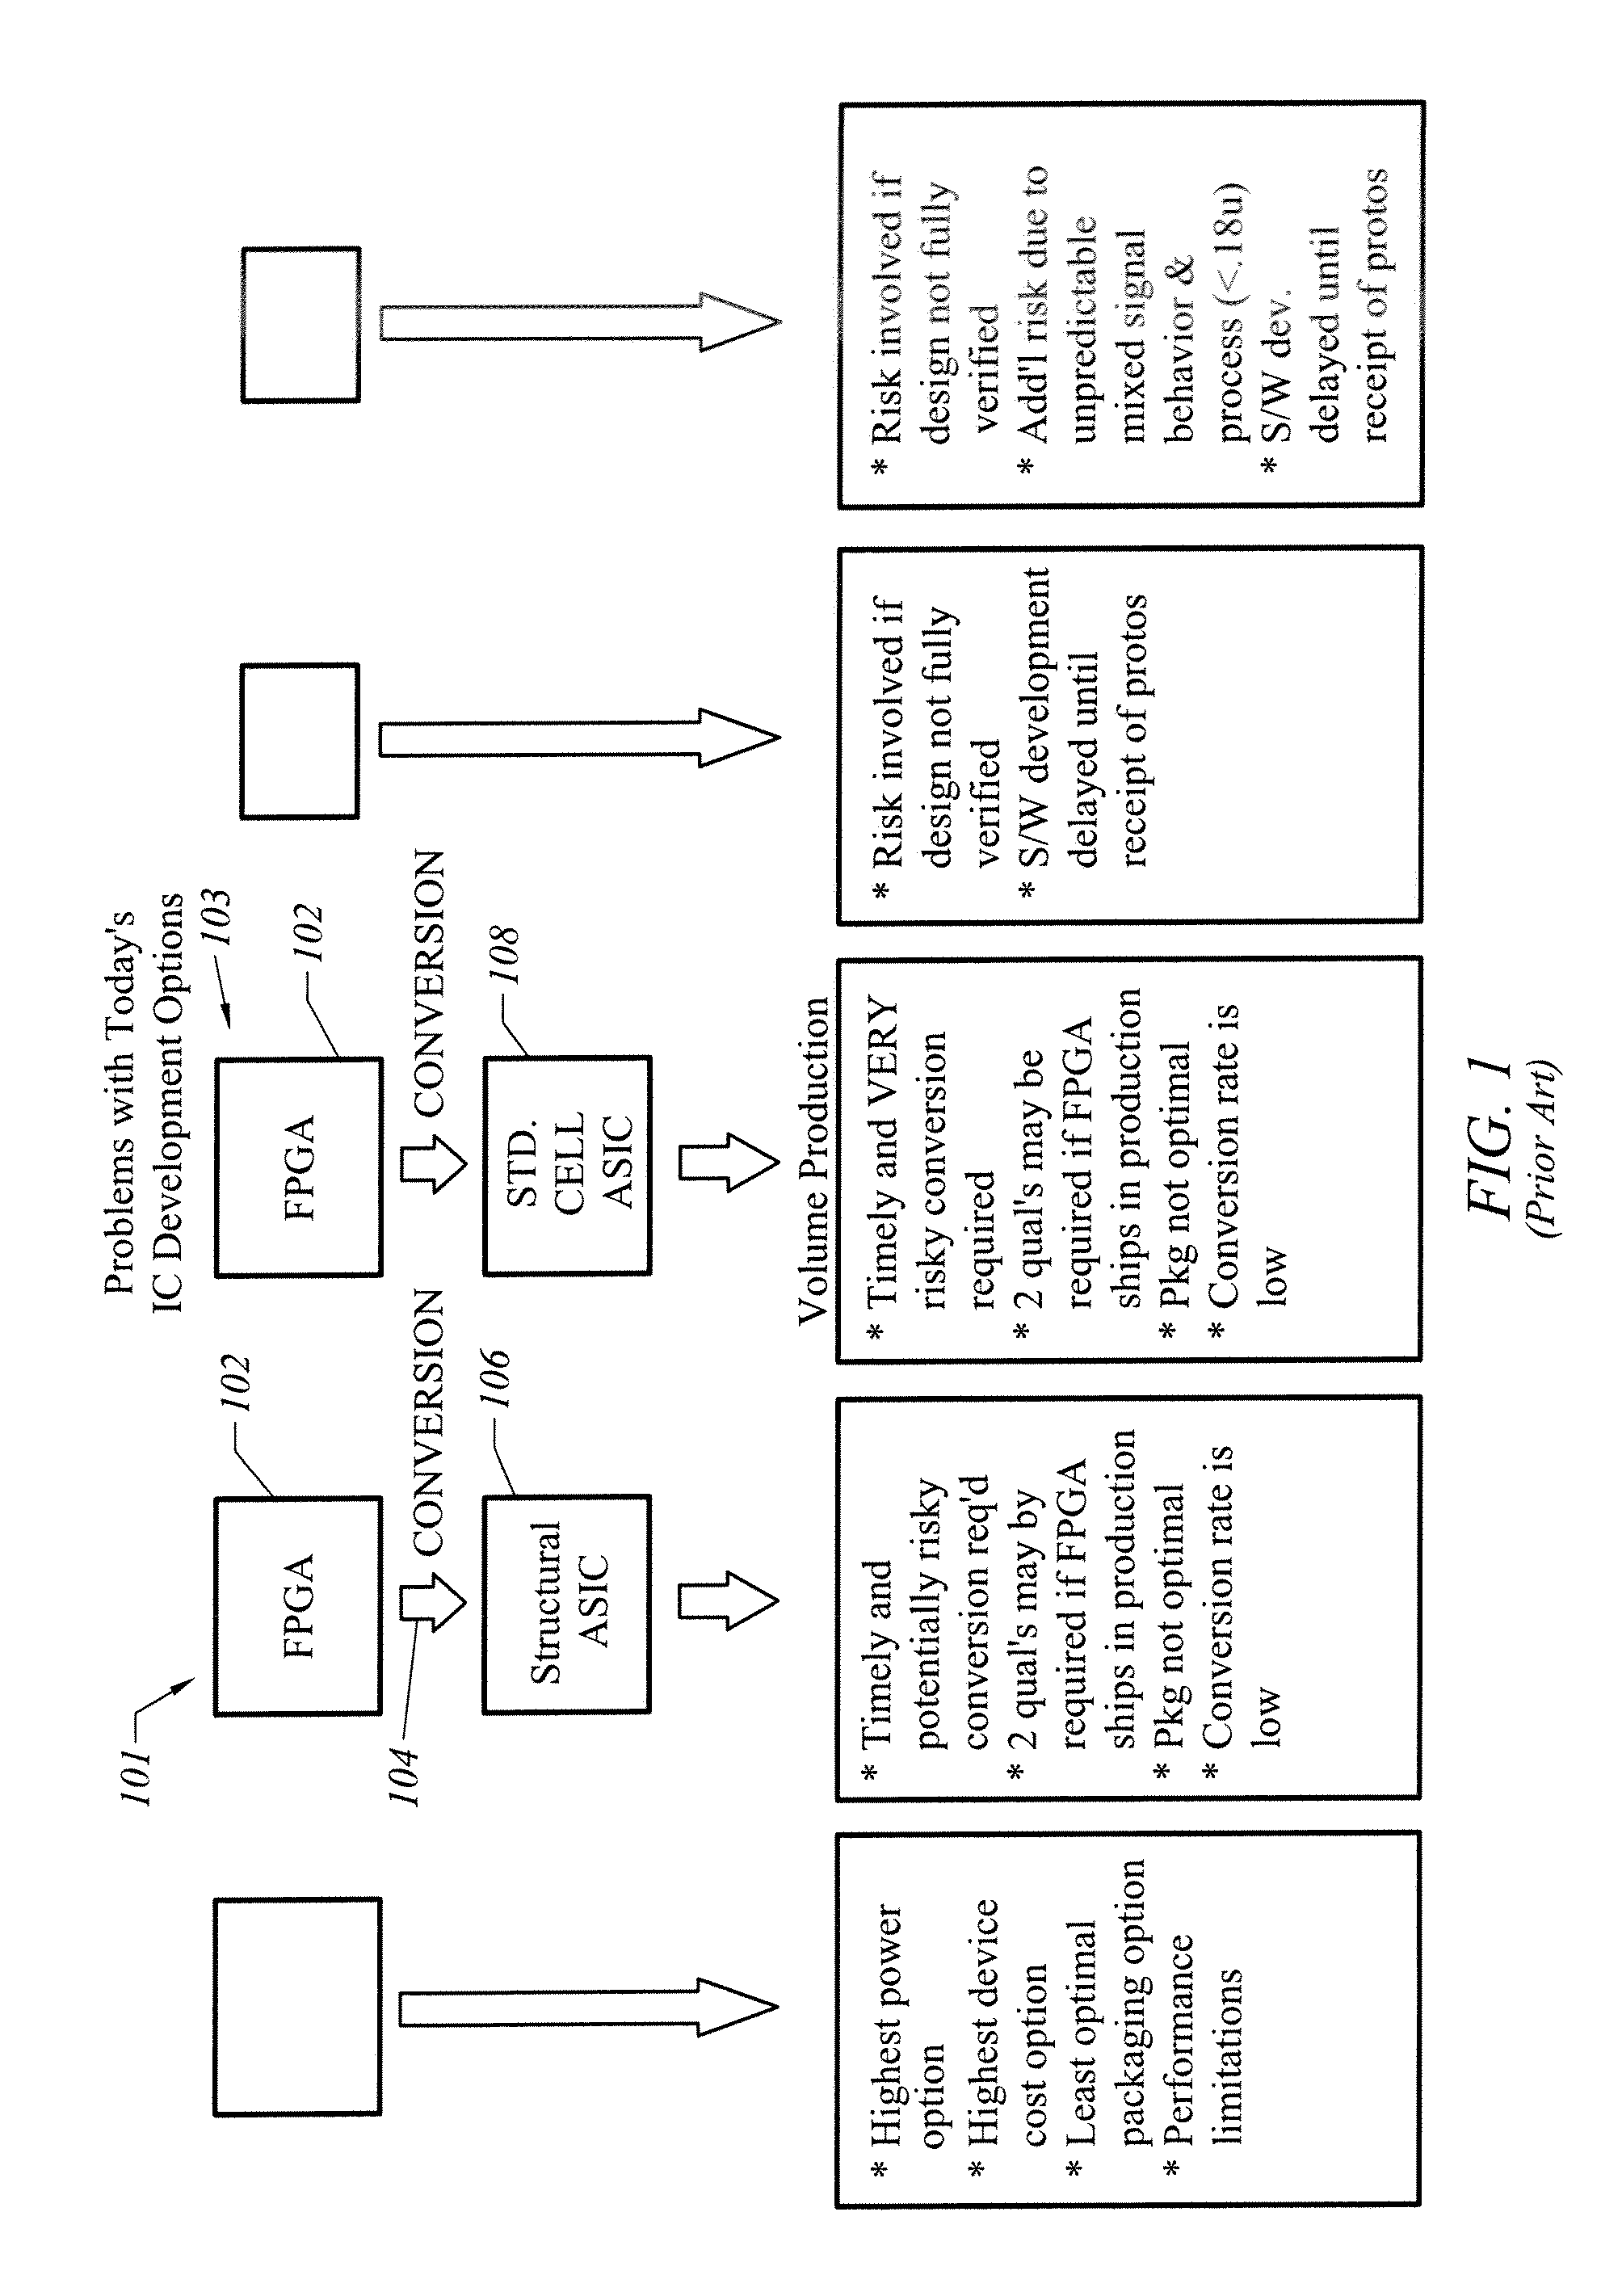 Method of developing application-specific integrated circuit devices